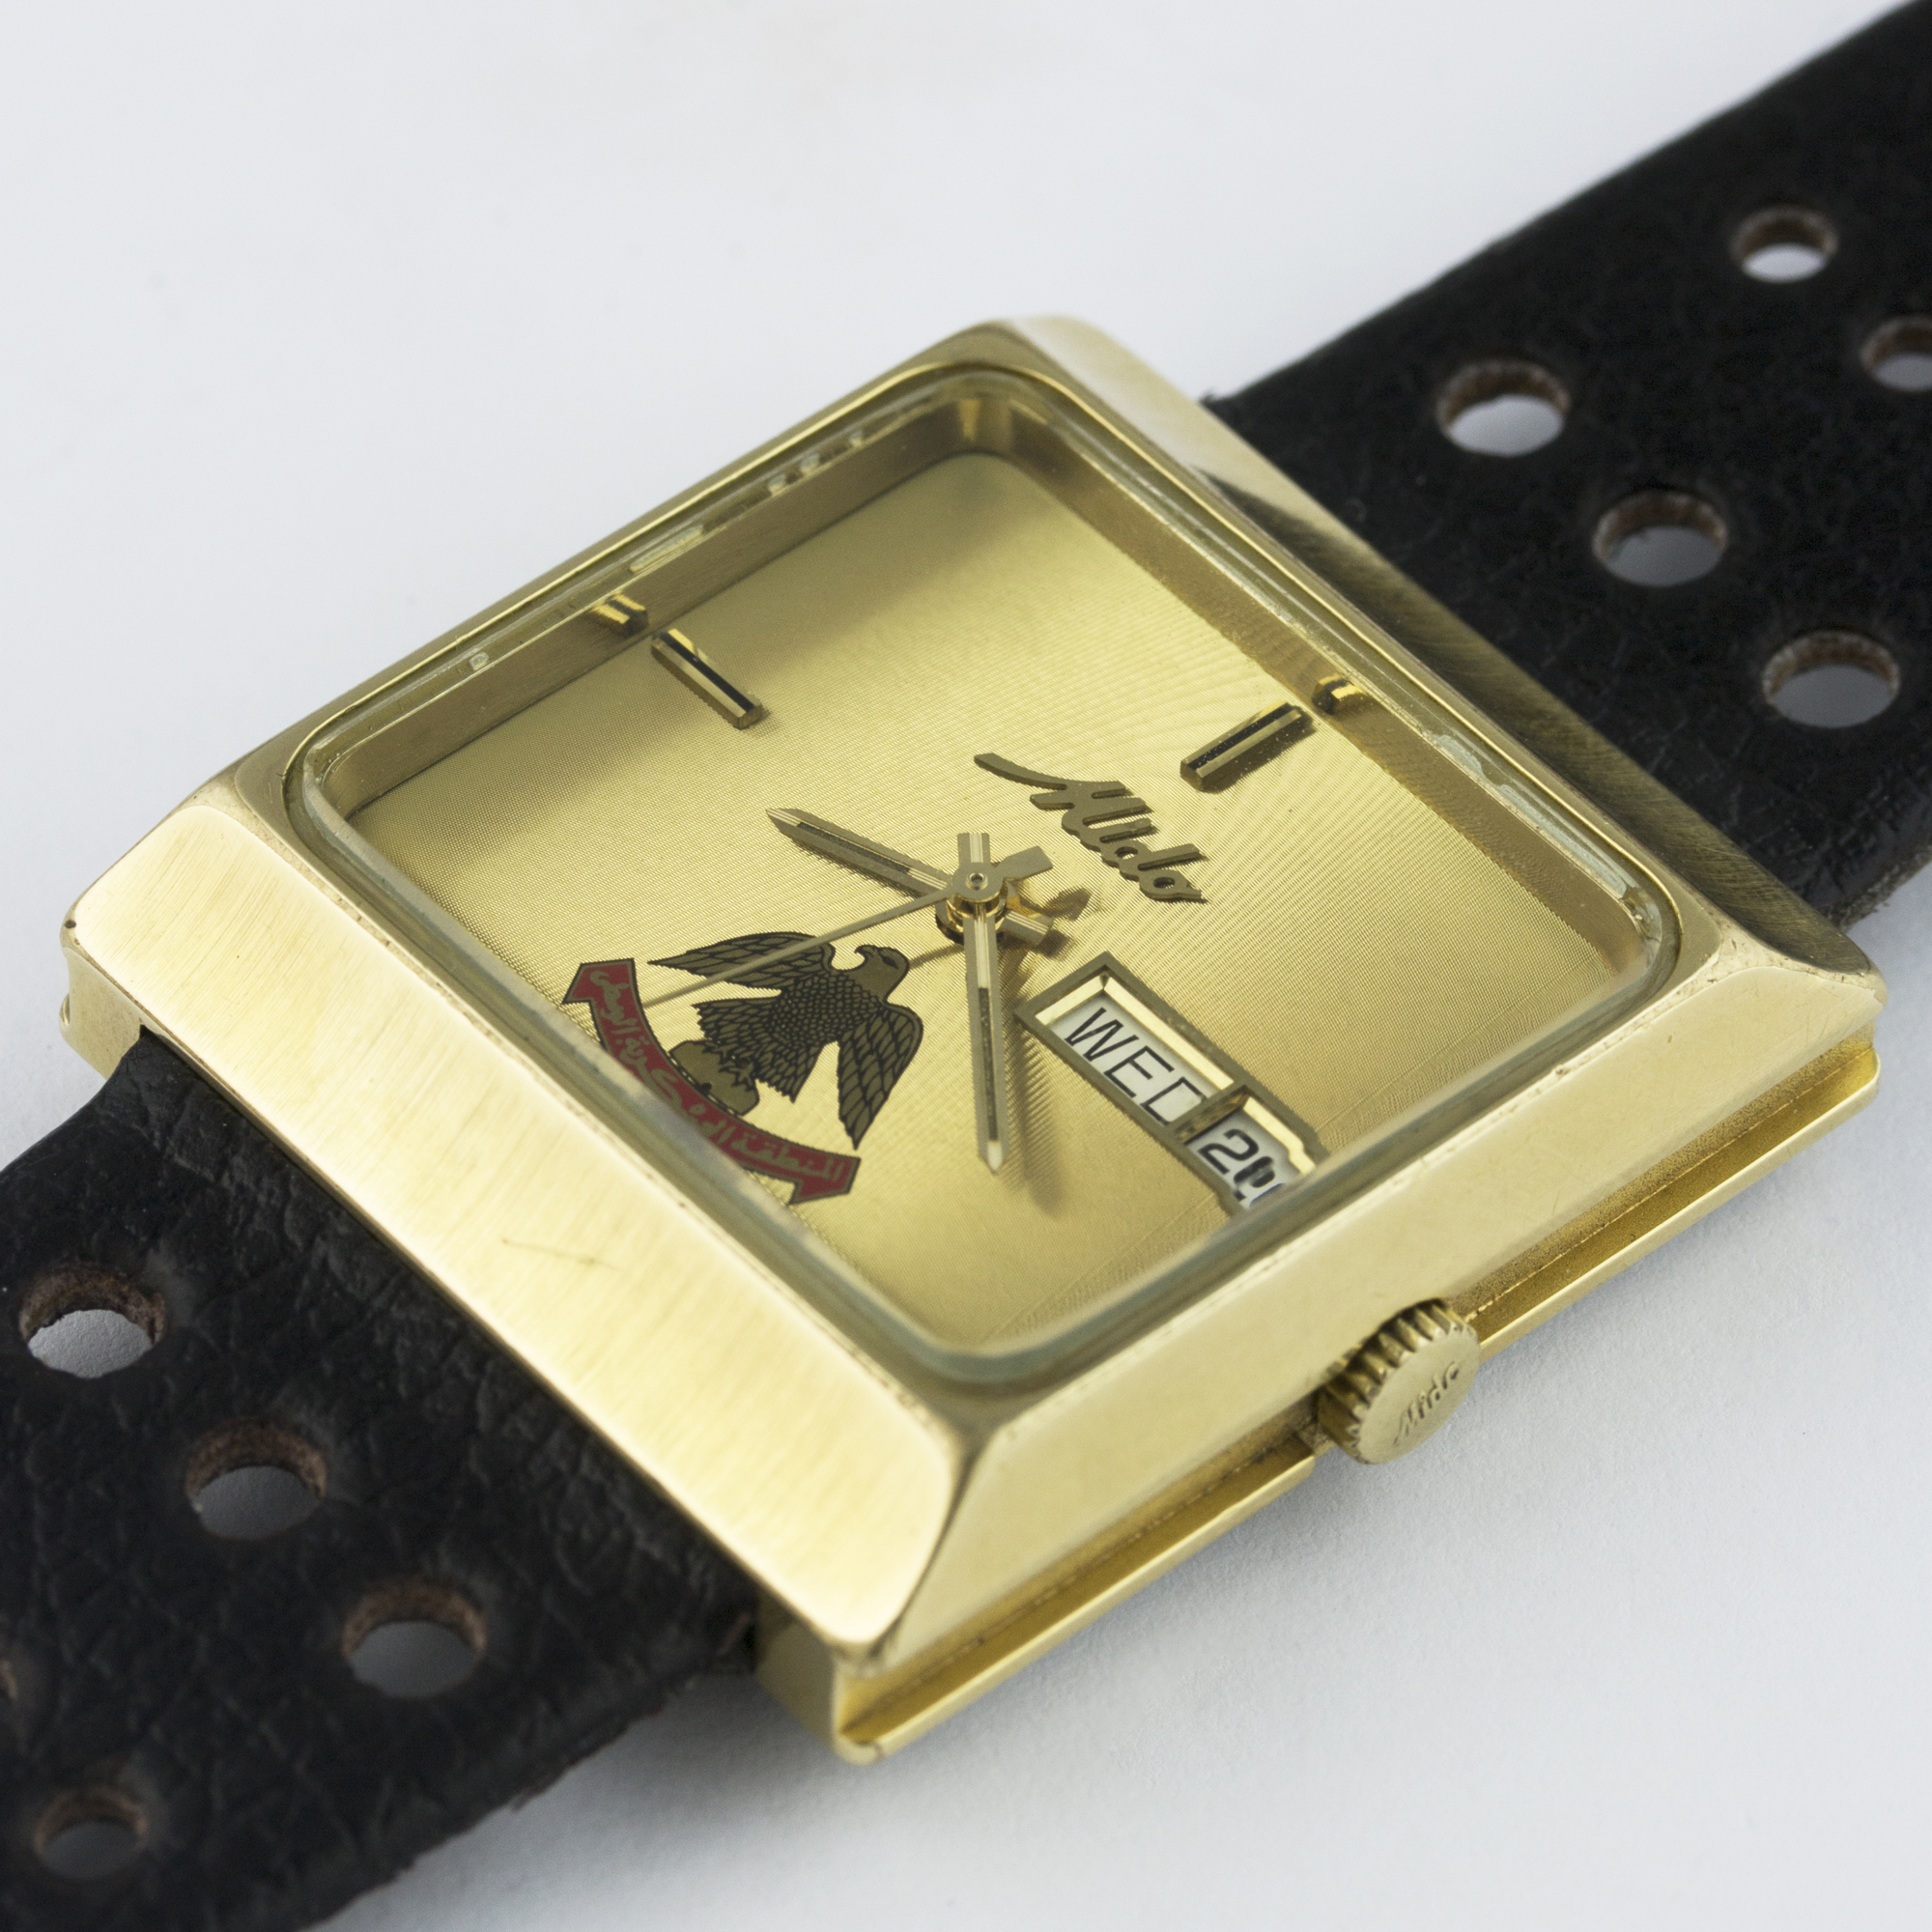 A GENTLEMAN'S GOLD PLATED MIDO AUTOMATIC WRIST WATCH CIRCA 1980s, COMMISSIONED BY THE UAE CENTRAL - Image 3 of 6